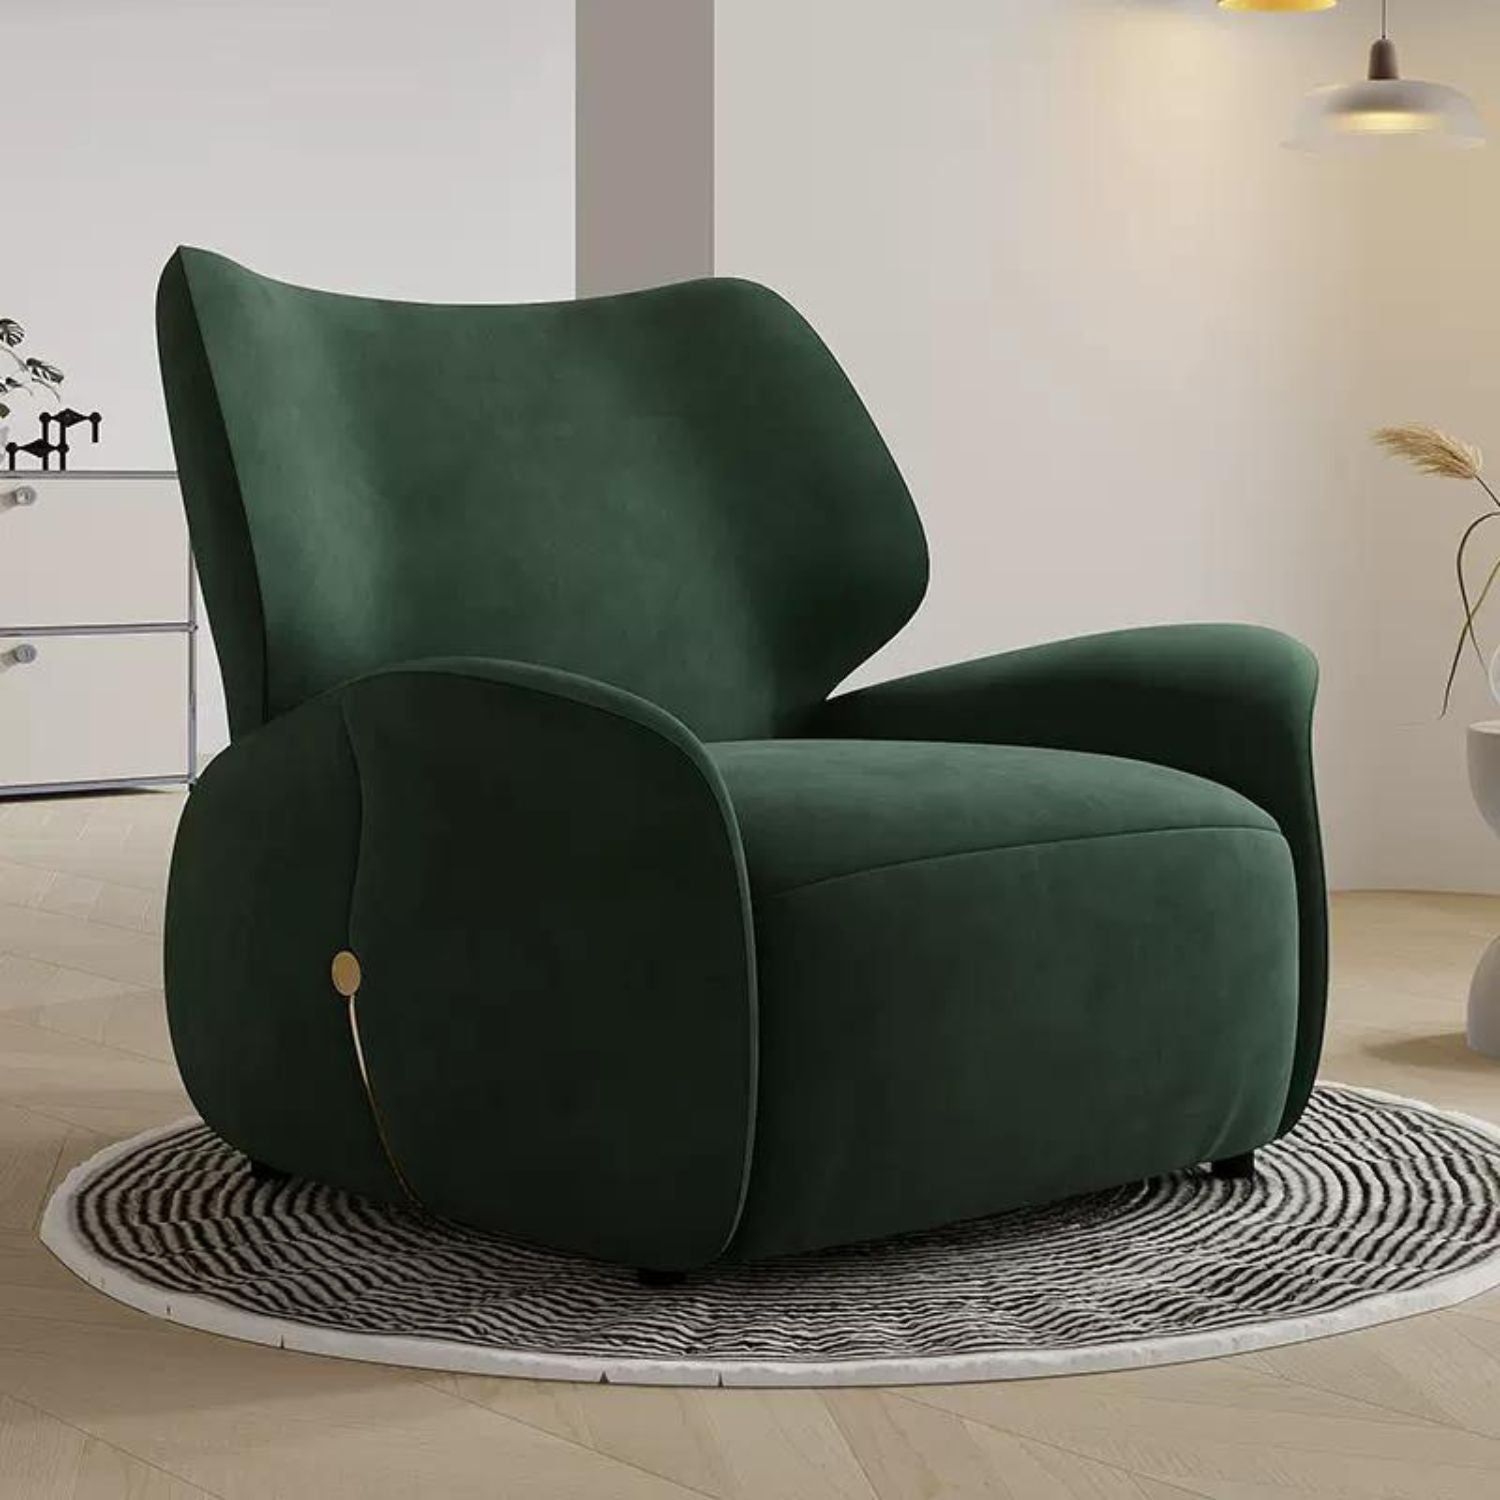 Sink into Style: The Best Comfortable Living Room Chairs for Ultimate Relaxation